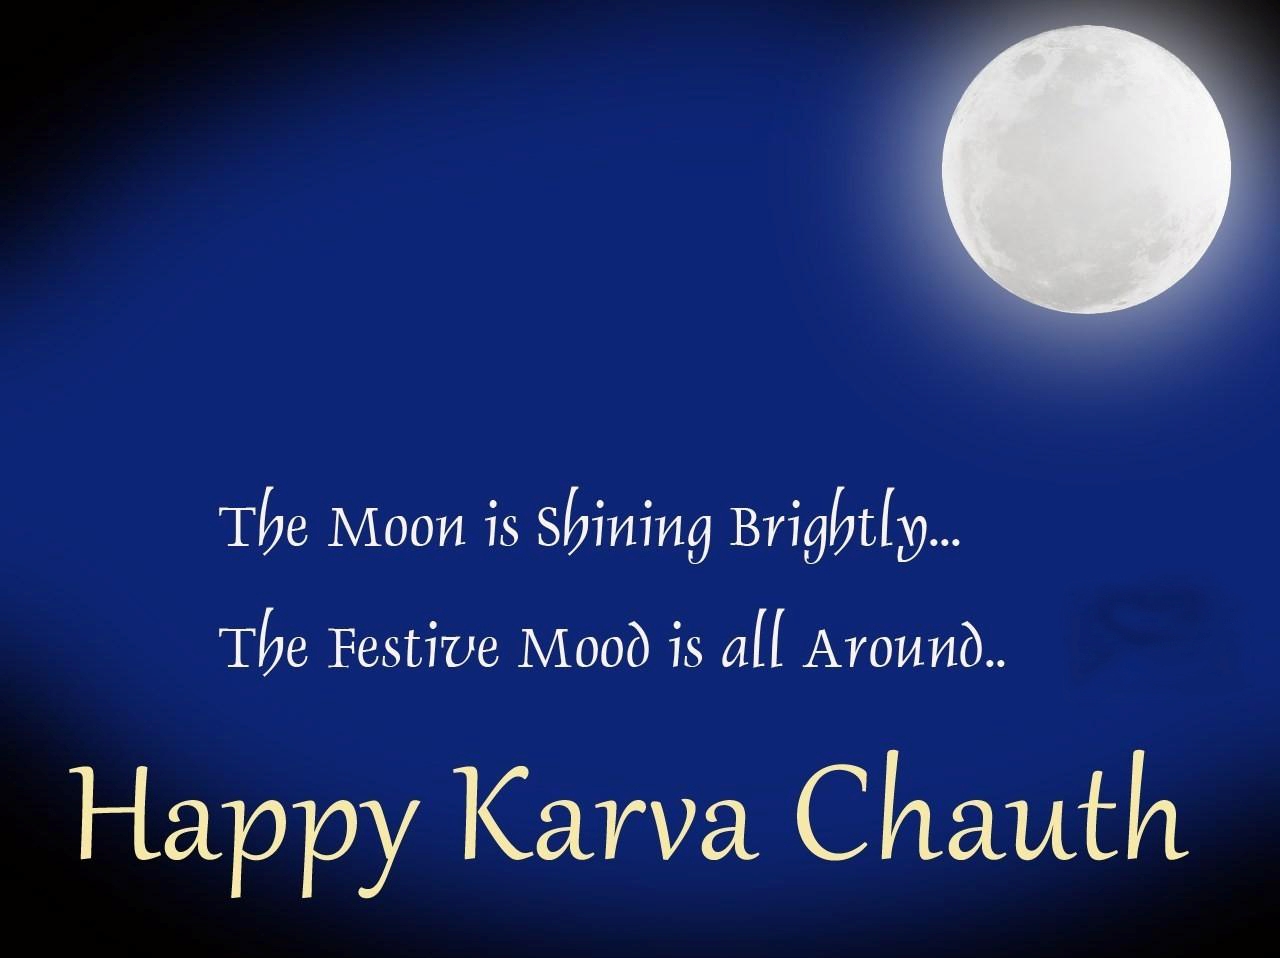 First Karva Chauth SMS